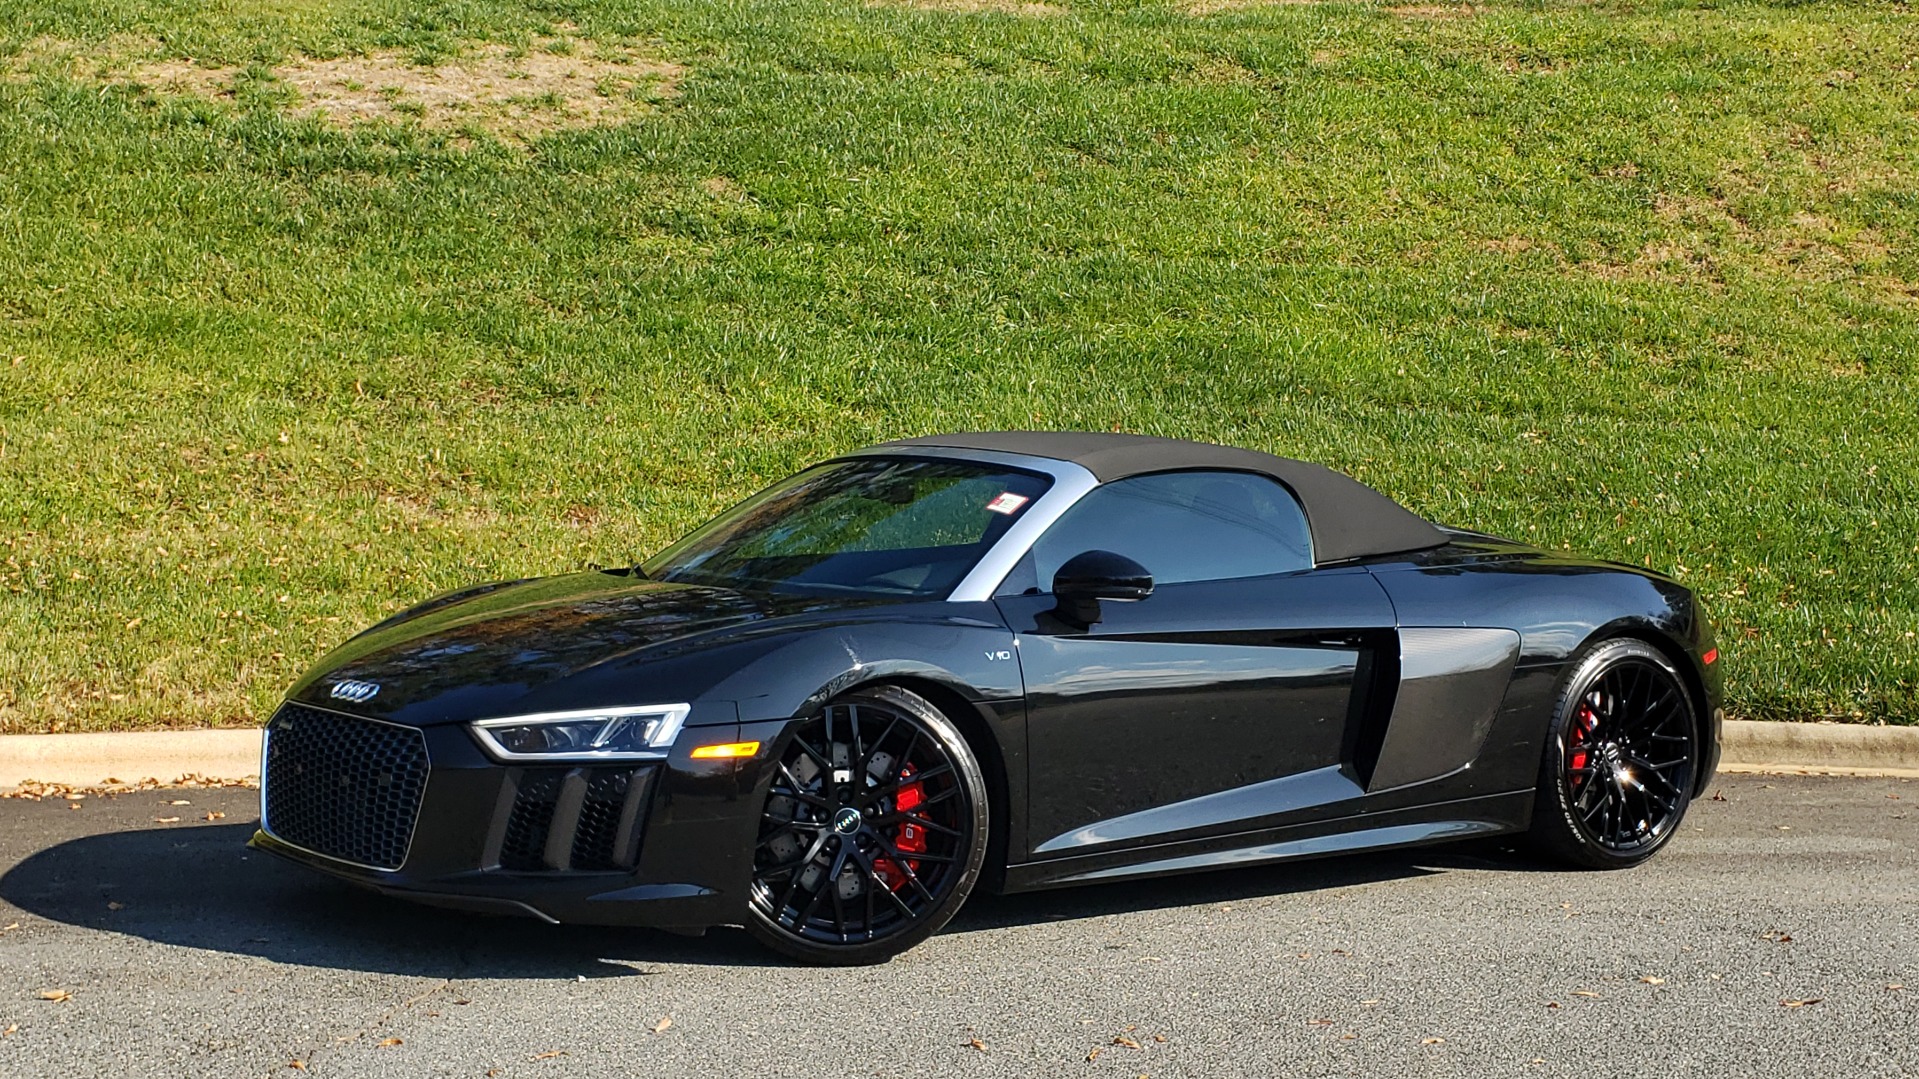 Used 2017 Audi R8 SPYDER V10 S-TRONIC / CARBON EXT & INT PKG / NAV / REARVIEW for sale Sold at Formula Imports in Charlotte NC 28227 6